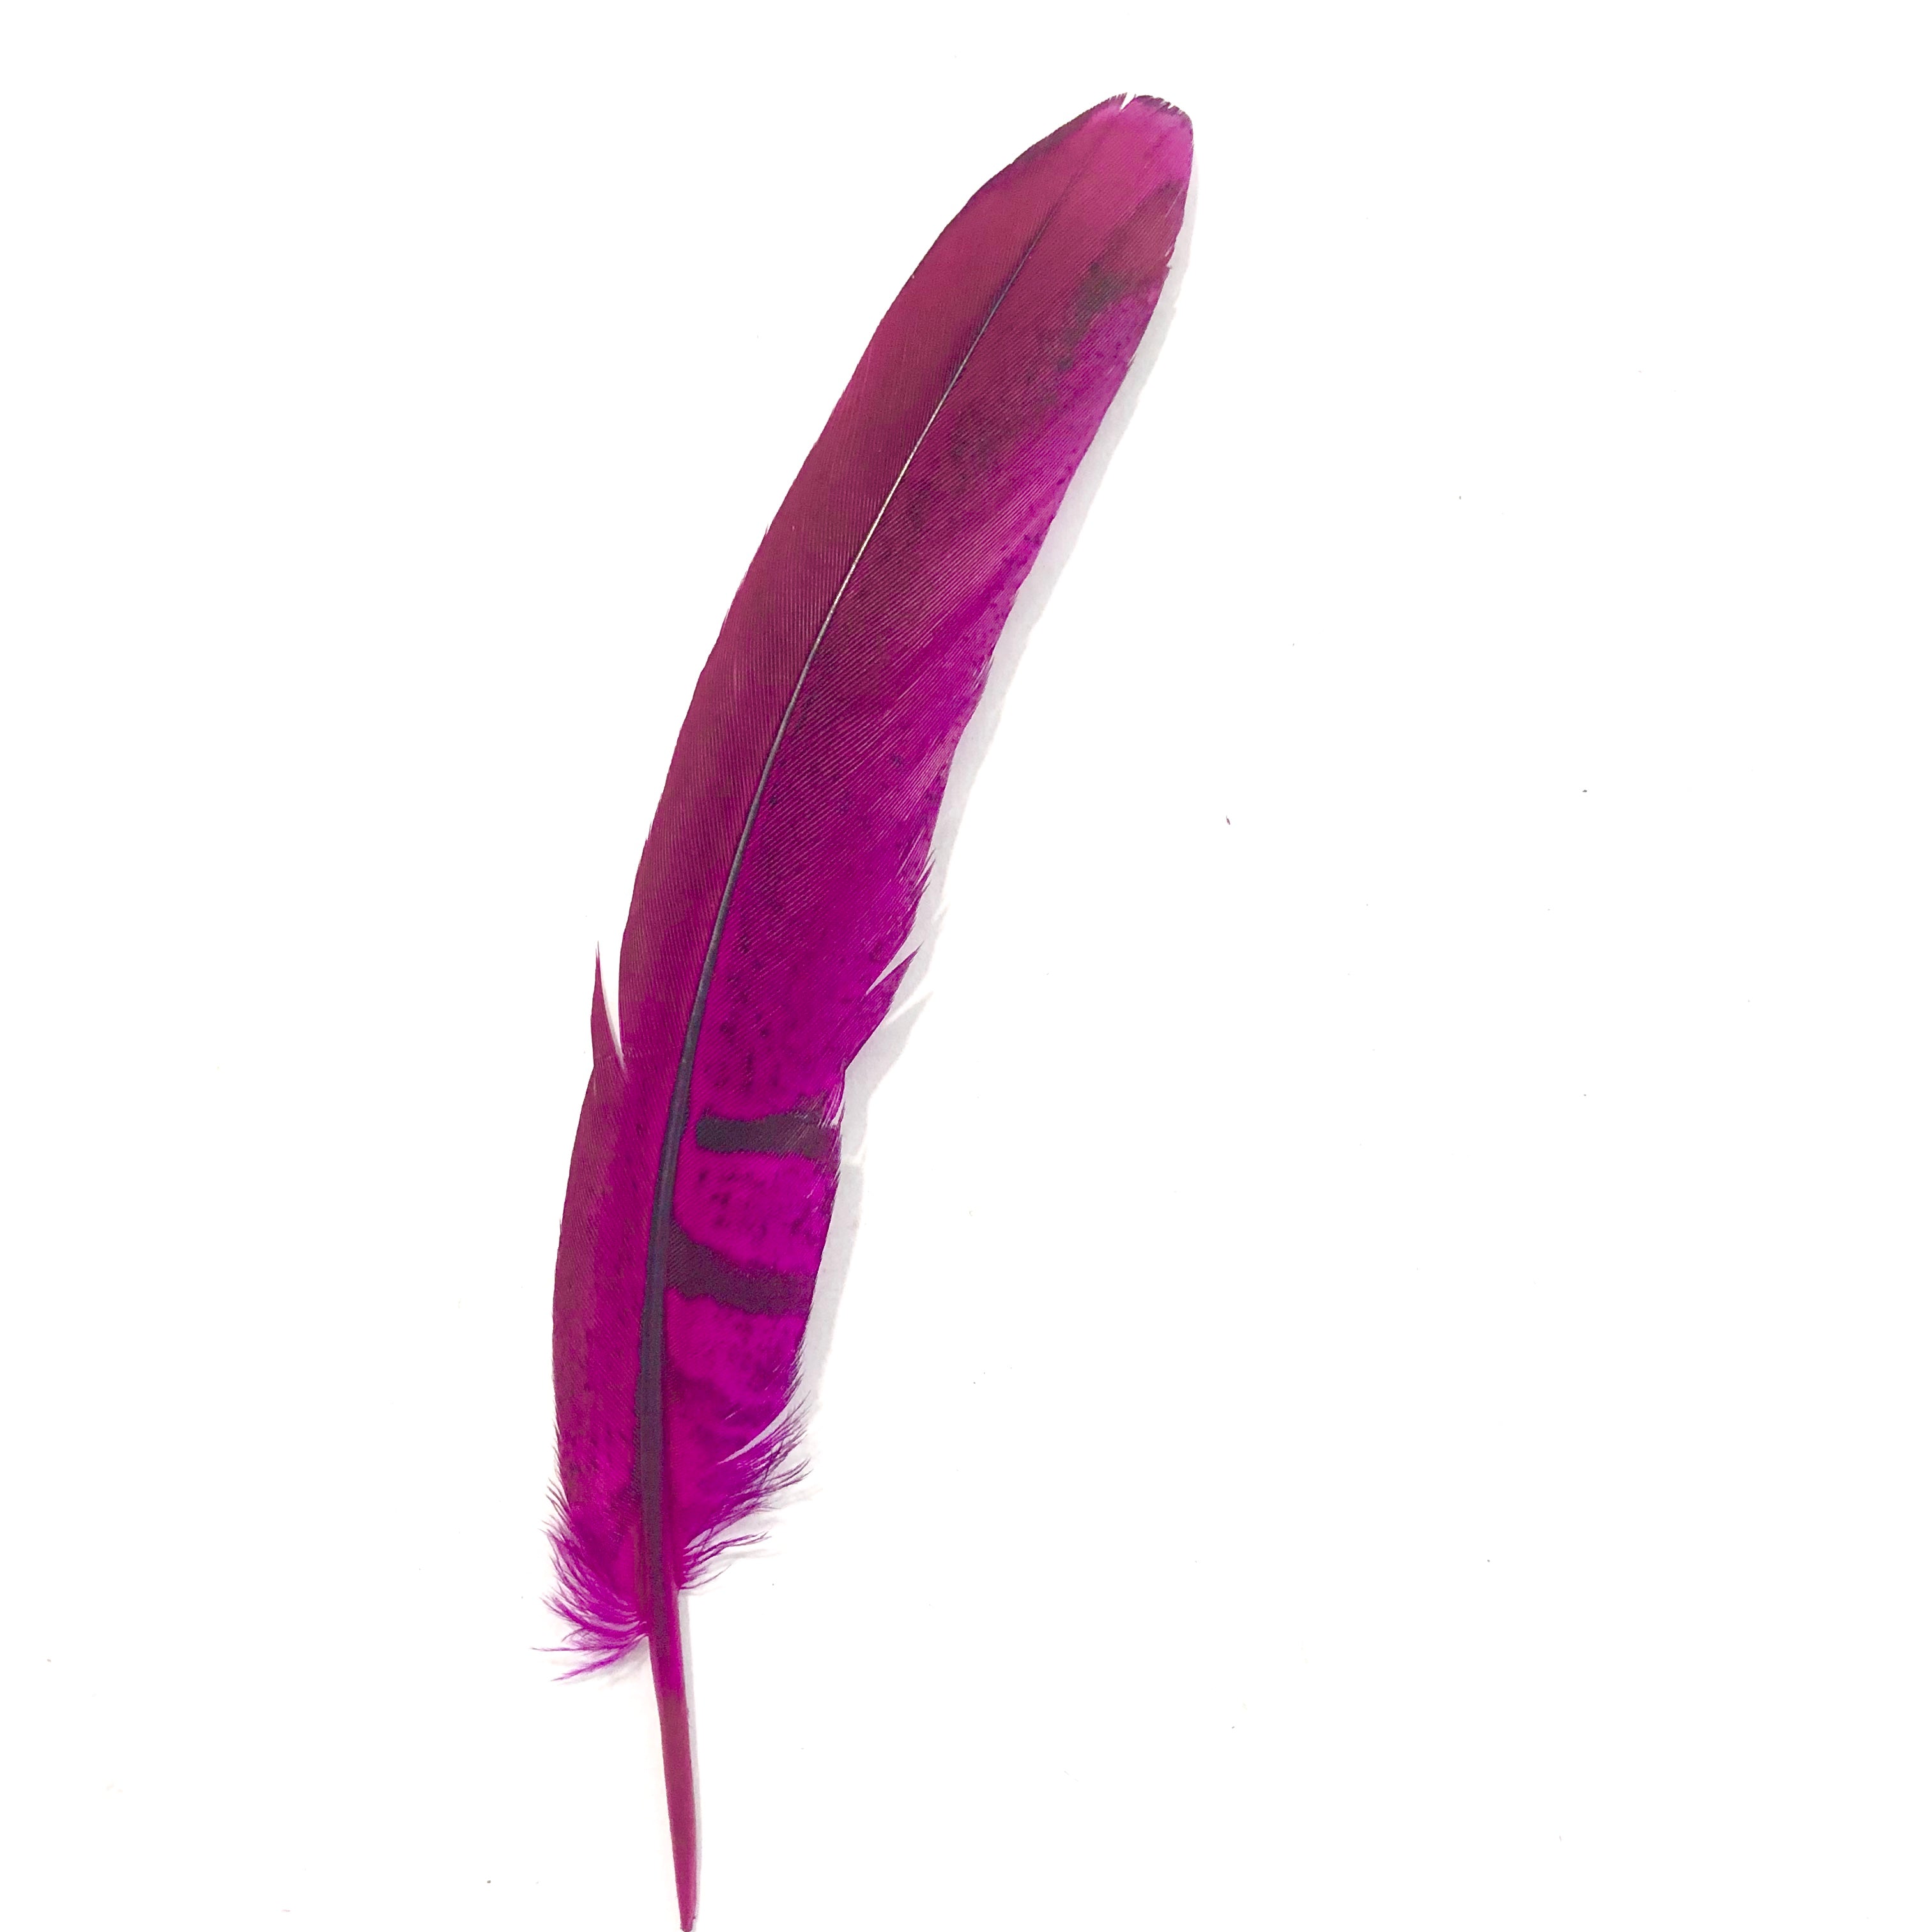 Under 6" Reeves Pheasant Tail Feather x 10 pcs - Cerise